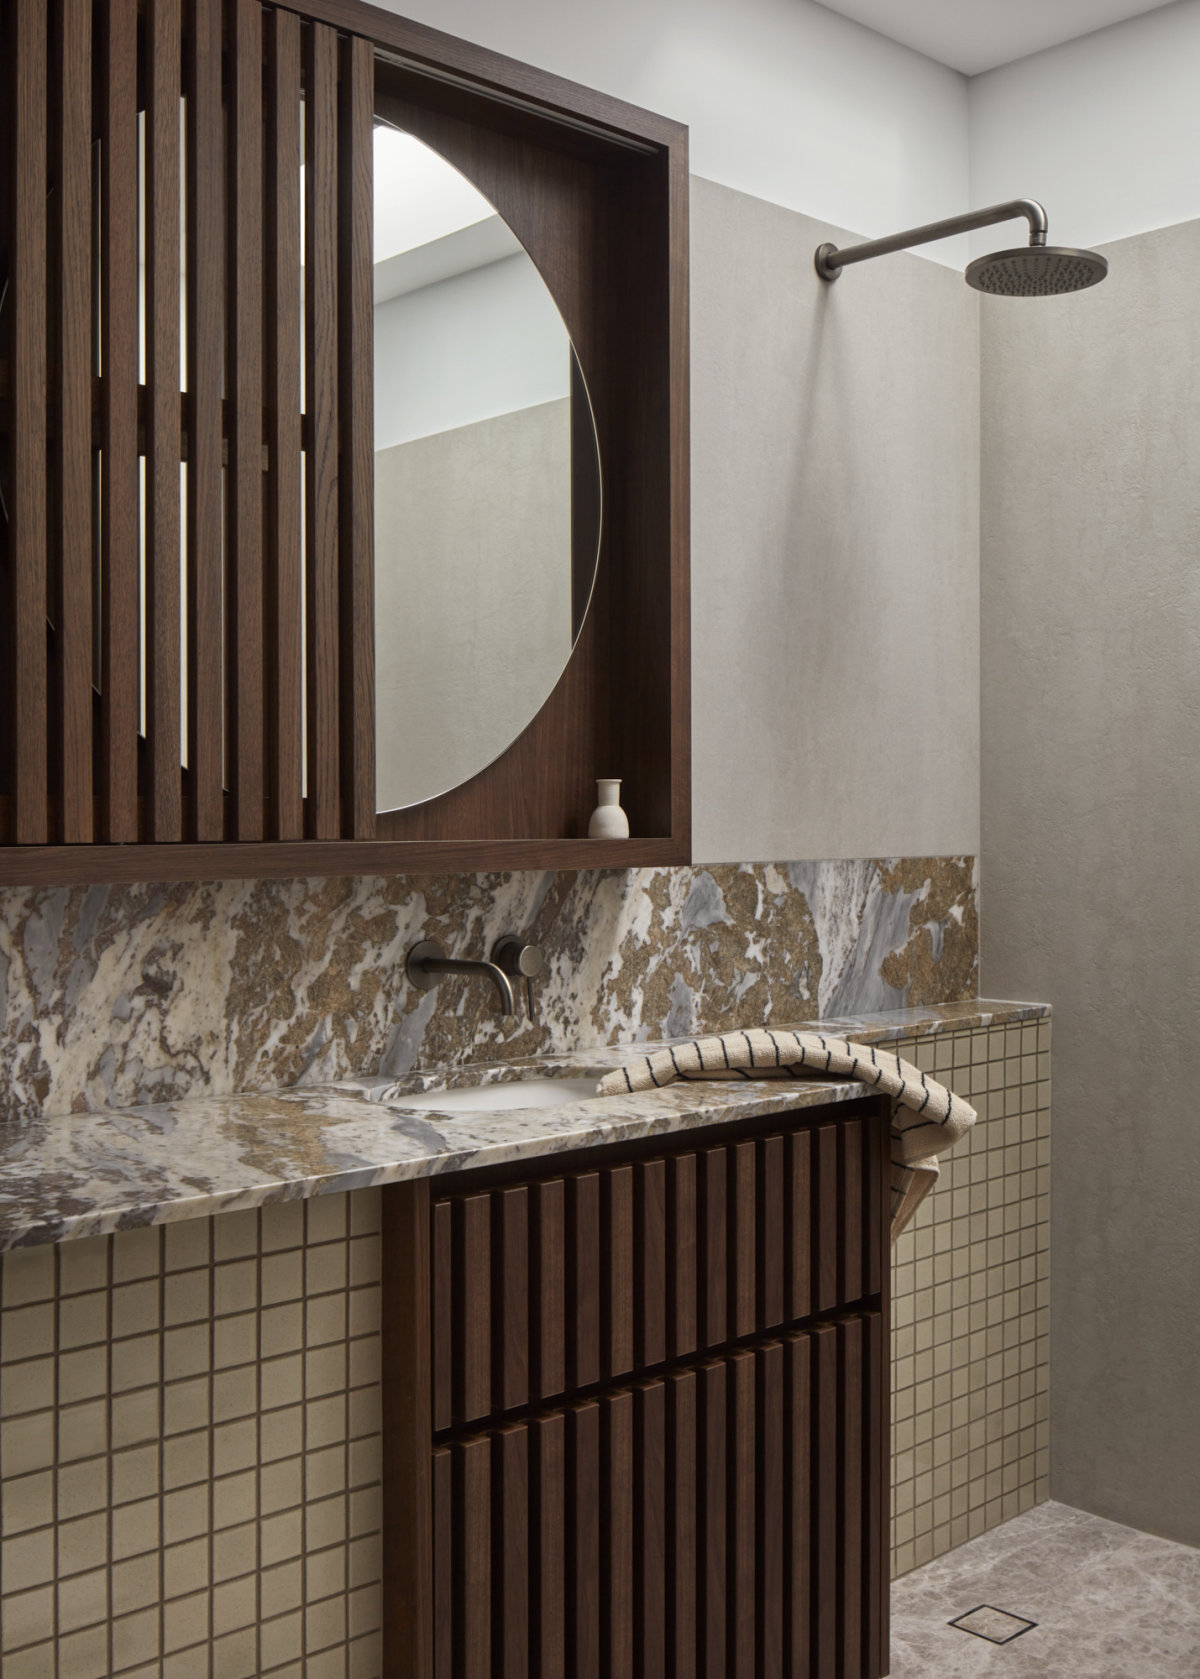 Bathroom vanity and shower area. Material like dark wood, light concrete, small beige tiles, and tri-colour patterned marble are used and arranged in balance.